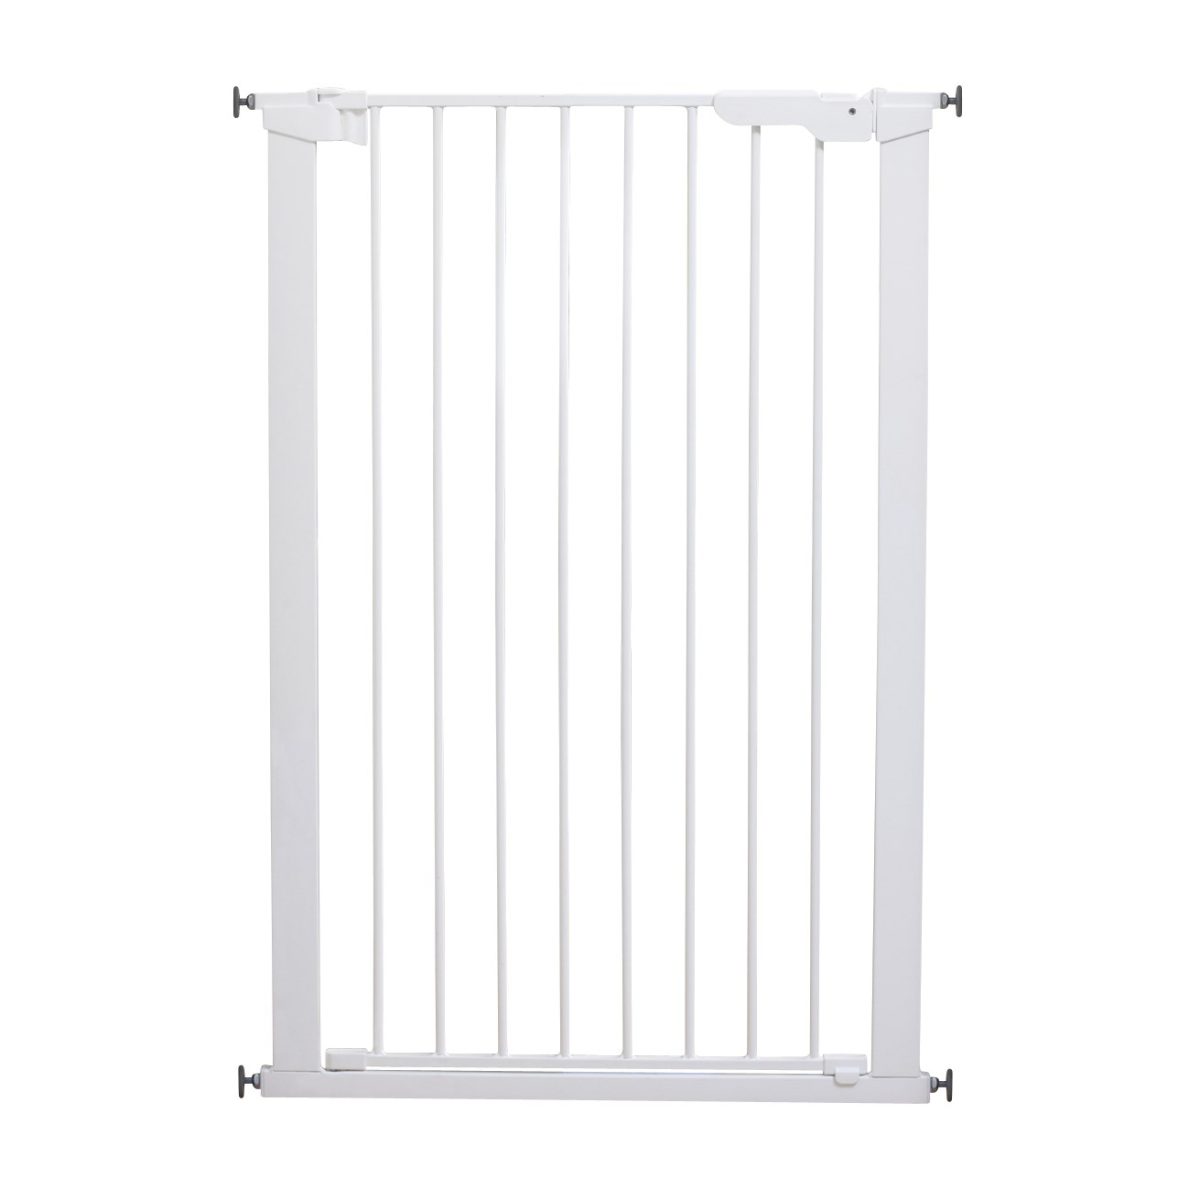 DogSpace Bonnie extra tall Pressure Fitted Pet gate, white